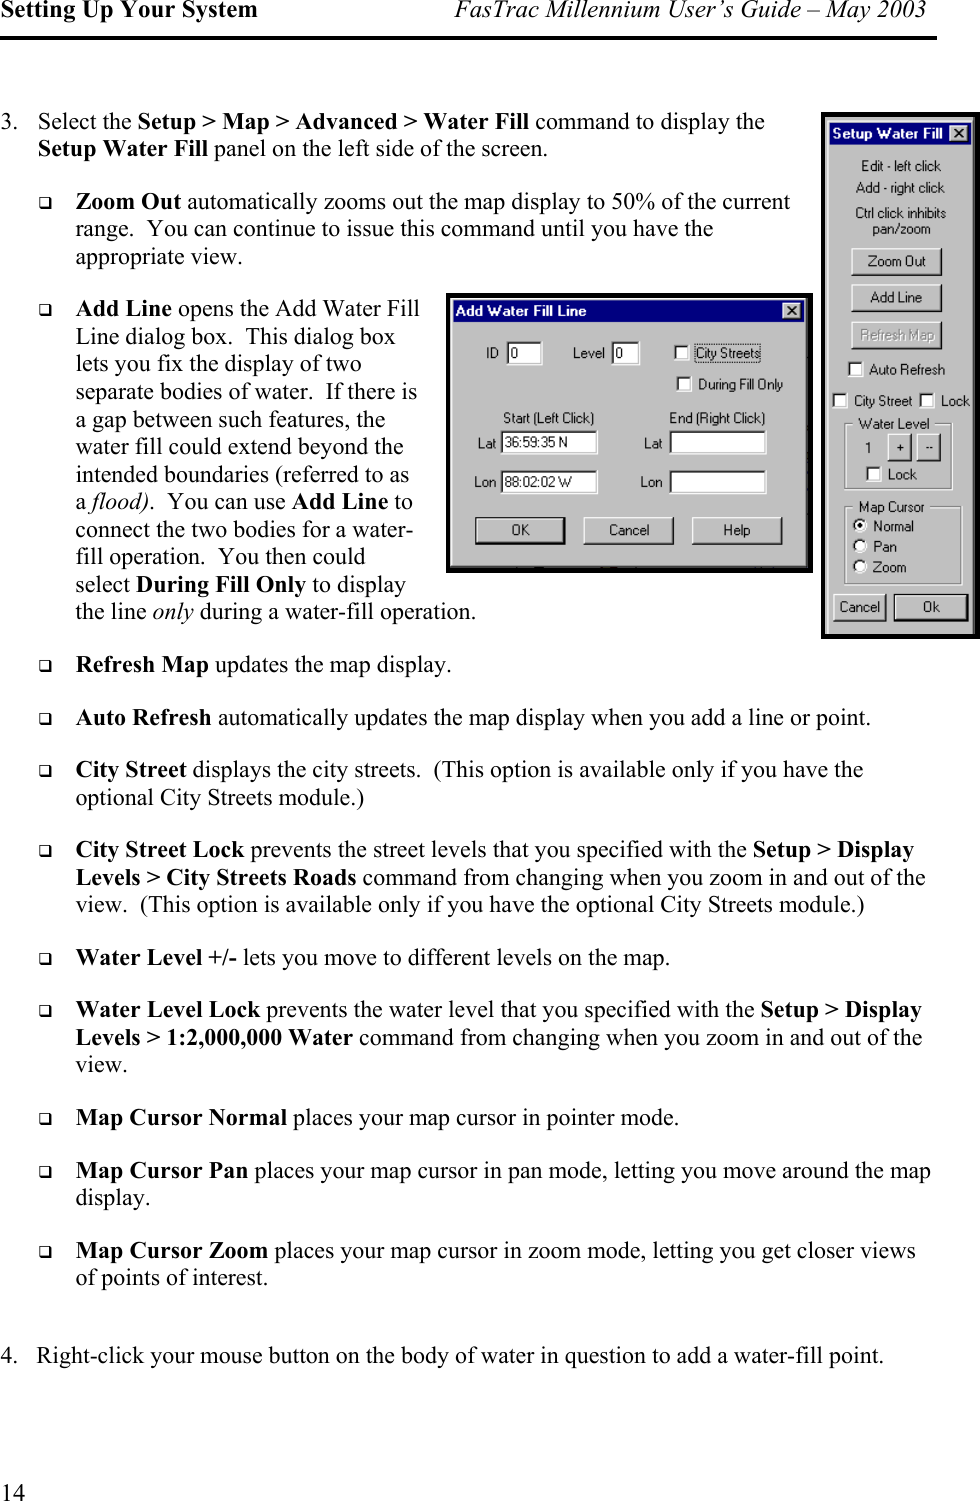 Setting Up Your System  FasTrac Millennium User’s Guide – May 2003 3. Select the Setup &gt; Map &gt; Advanced &gt; Water Fill command to display the Setup Water Fill panel on the left side of the screen.     Zoom Out automatically zooms out the map display to 50% of the current range.  You can continue to issue this command until you have the appropriate view.   Add Line opens the Add Water Fill Line dialog box.  This dialog box lets you fix the display of two separate bodies of water.  If there is a gap between such features, the water fill could extend beyond the intended boundaries (referred to as a flood).  You can use Add Line toconnect the two bodies for a water-fill operation.  You then could select During Fill Only to display  the line only during a water-fill operation.   Refresh Map updates the map display.   Auto Refresh automatically updates the map display when you add a line or point.   eets.  (This option is available only if you have the optional City Streets module.)  f the view.  (This option is available only if you have the optional City Streets module.)   Water Level +/- lets you move to different levels on the map.     &gt; 1:2,000,000 Water command from changing when you zoom in and out of the view.   Map Cursor Normal places your map cursor in pointer mode.   sor Pan places your map cursor in pan mode, letting you move around the map display.   your map cursor in zoom mode, letting you get closer views of points of interest. 4.   Right-click your mouse button on the body of water in question to add a water-fill point. City Street displays the city strCity Street Lock prevents the street levels that you specified with the Setup &gt; Display Levels &gt; City Streets Roads command from changing when you zoom in and out oWater Level Lock prevents the water level that you specified with the Setup &gt; Display LevelsMap CurMap Cursor Zoom places 14 